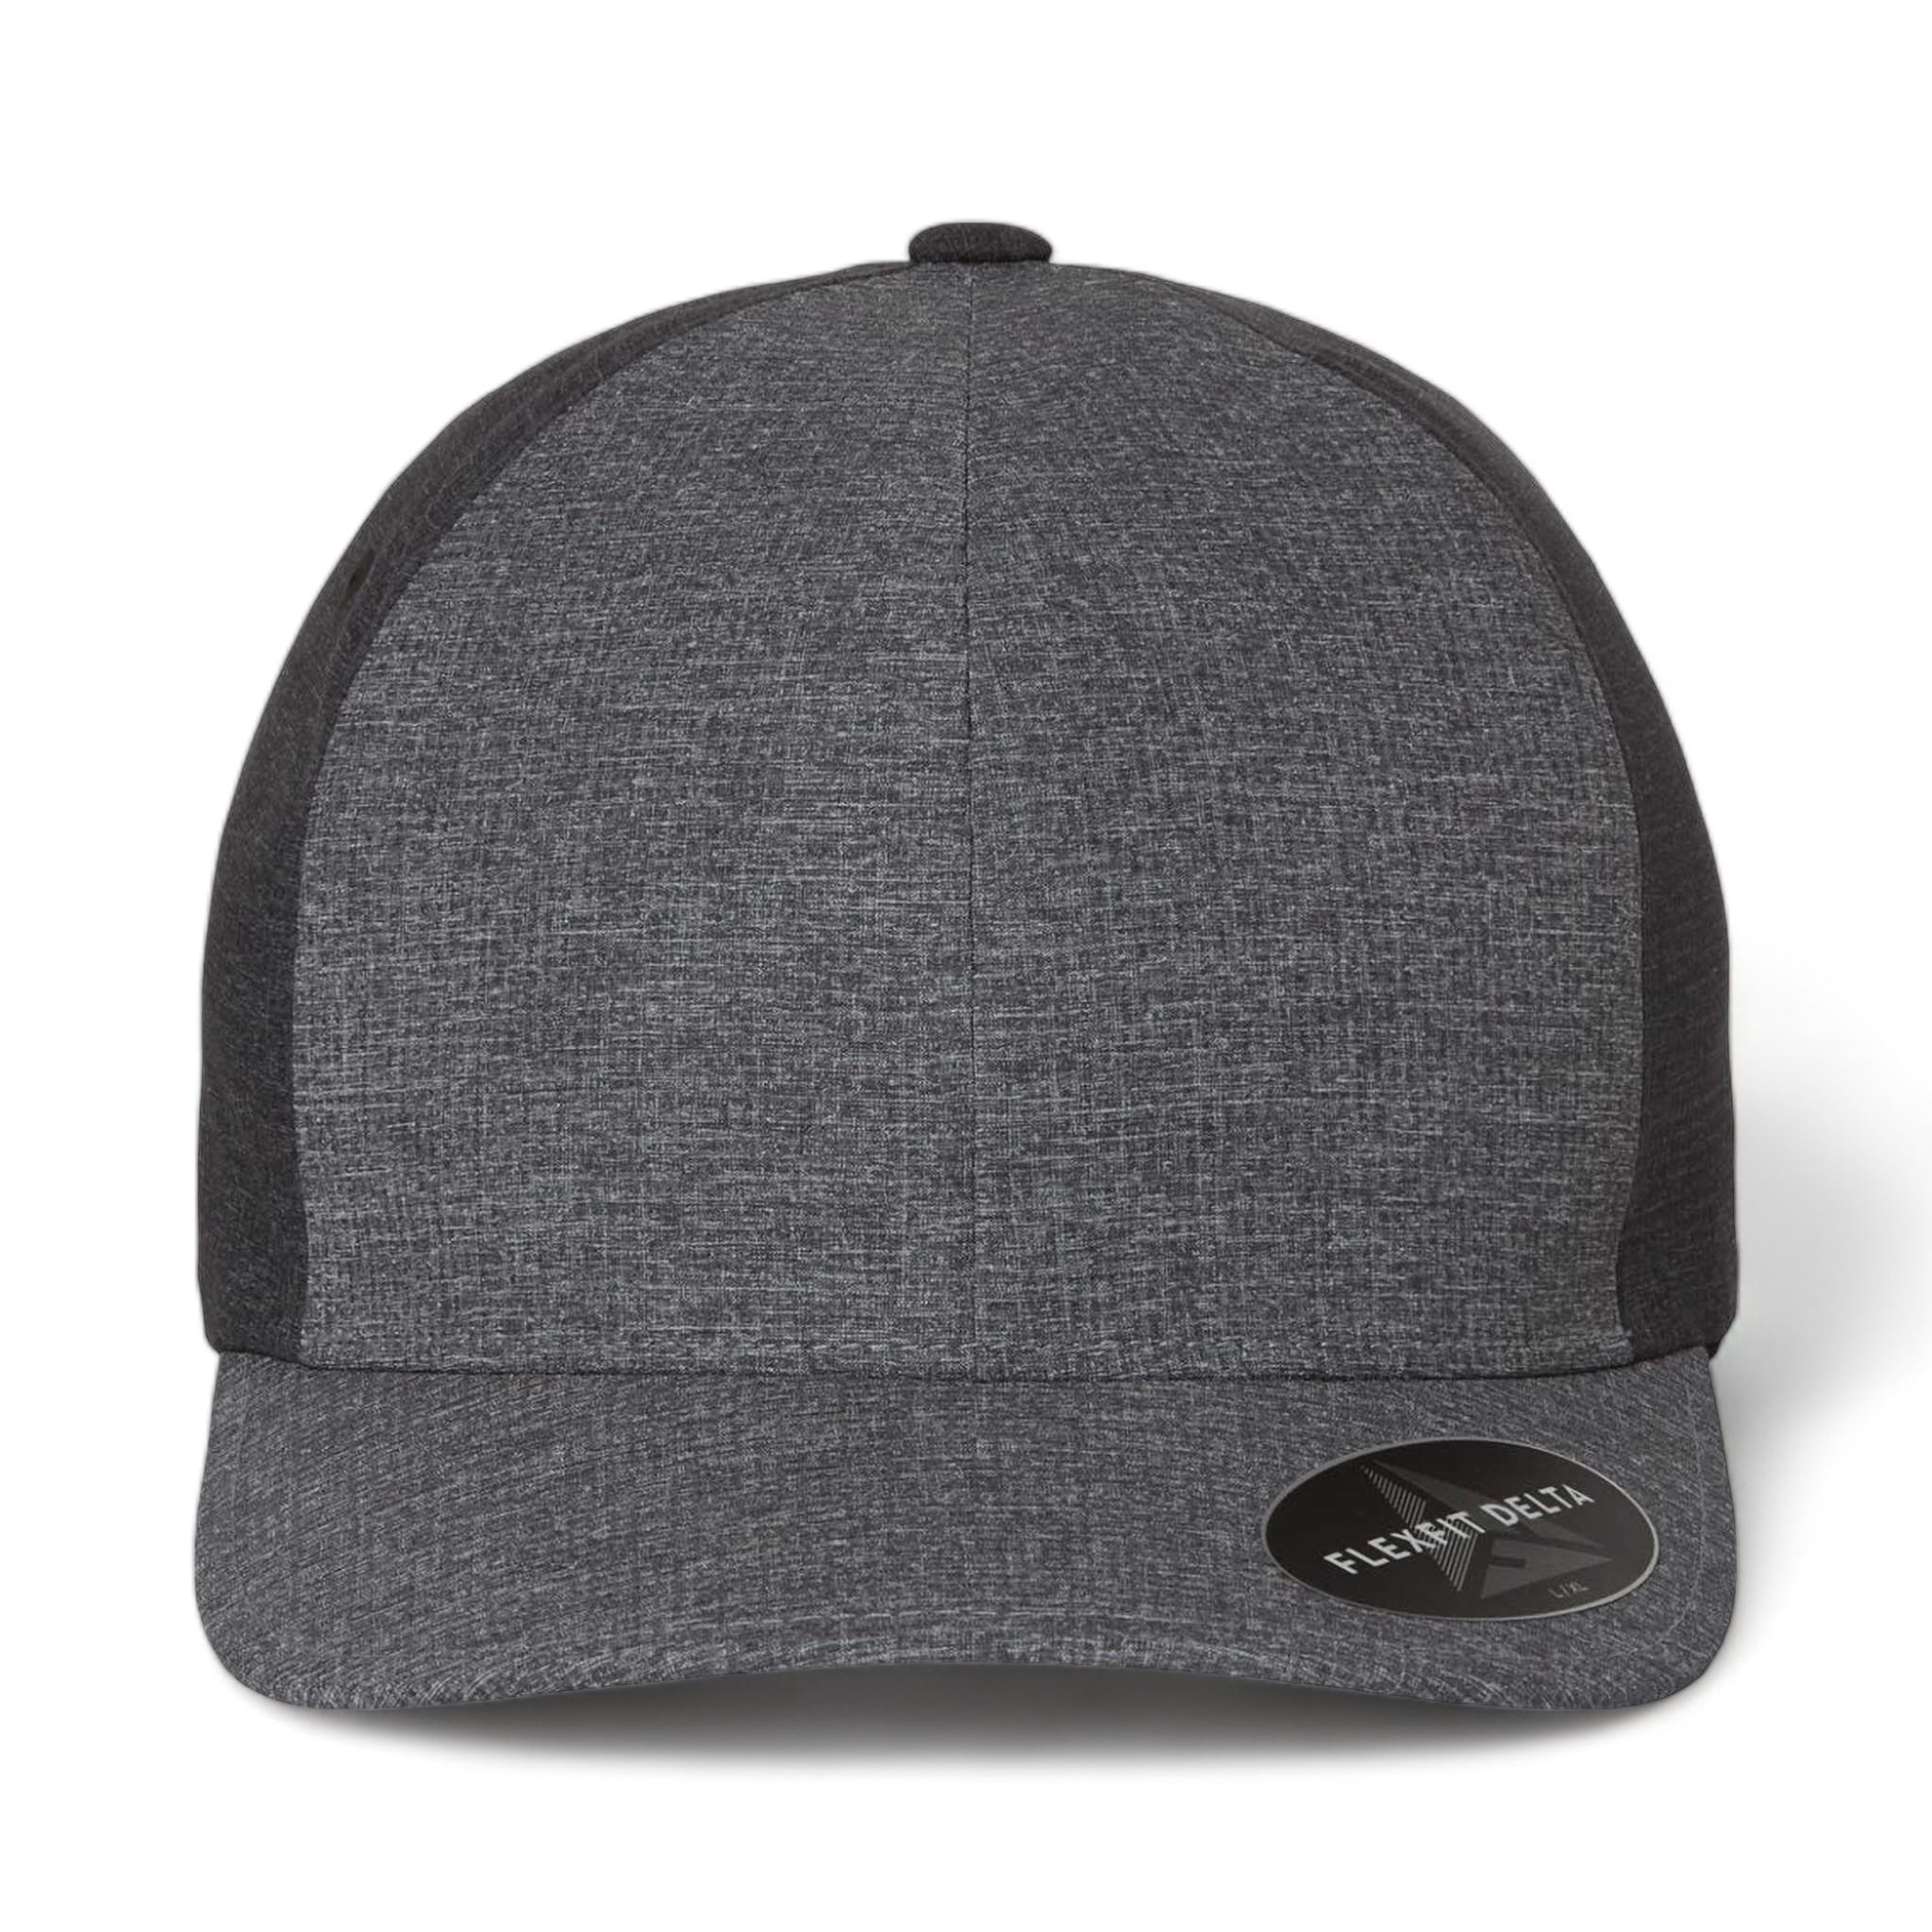 Front view of Flexfit 180 custom hat in mélange blue and mélange charcoal